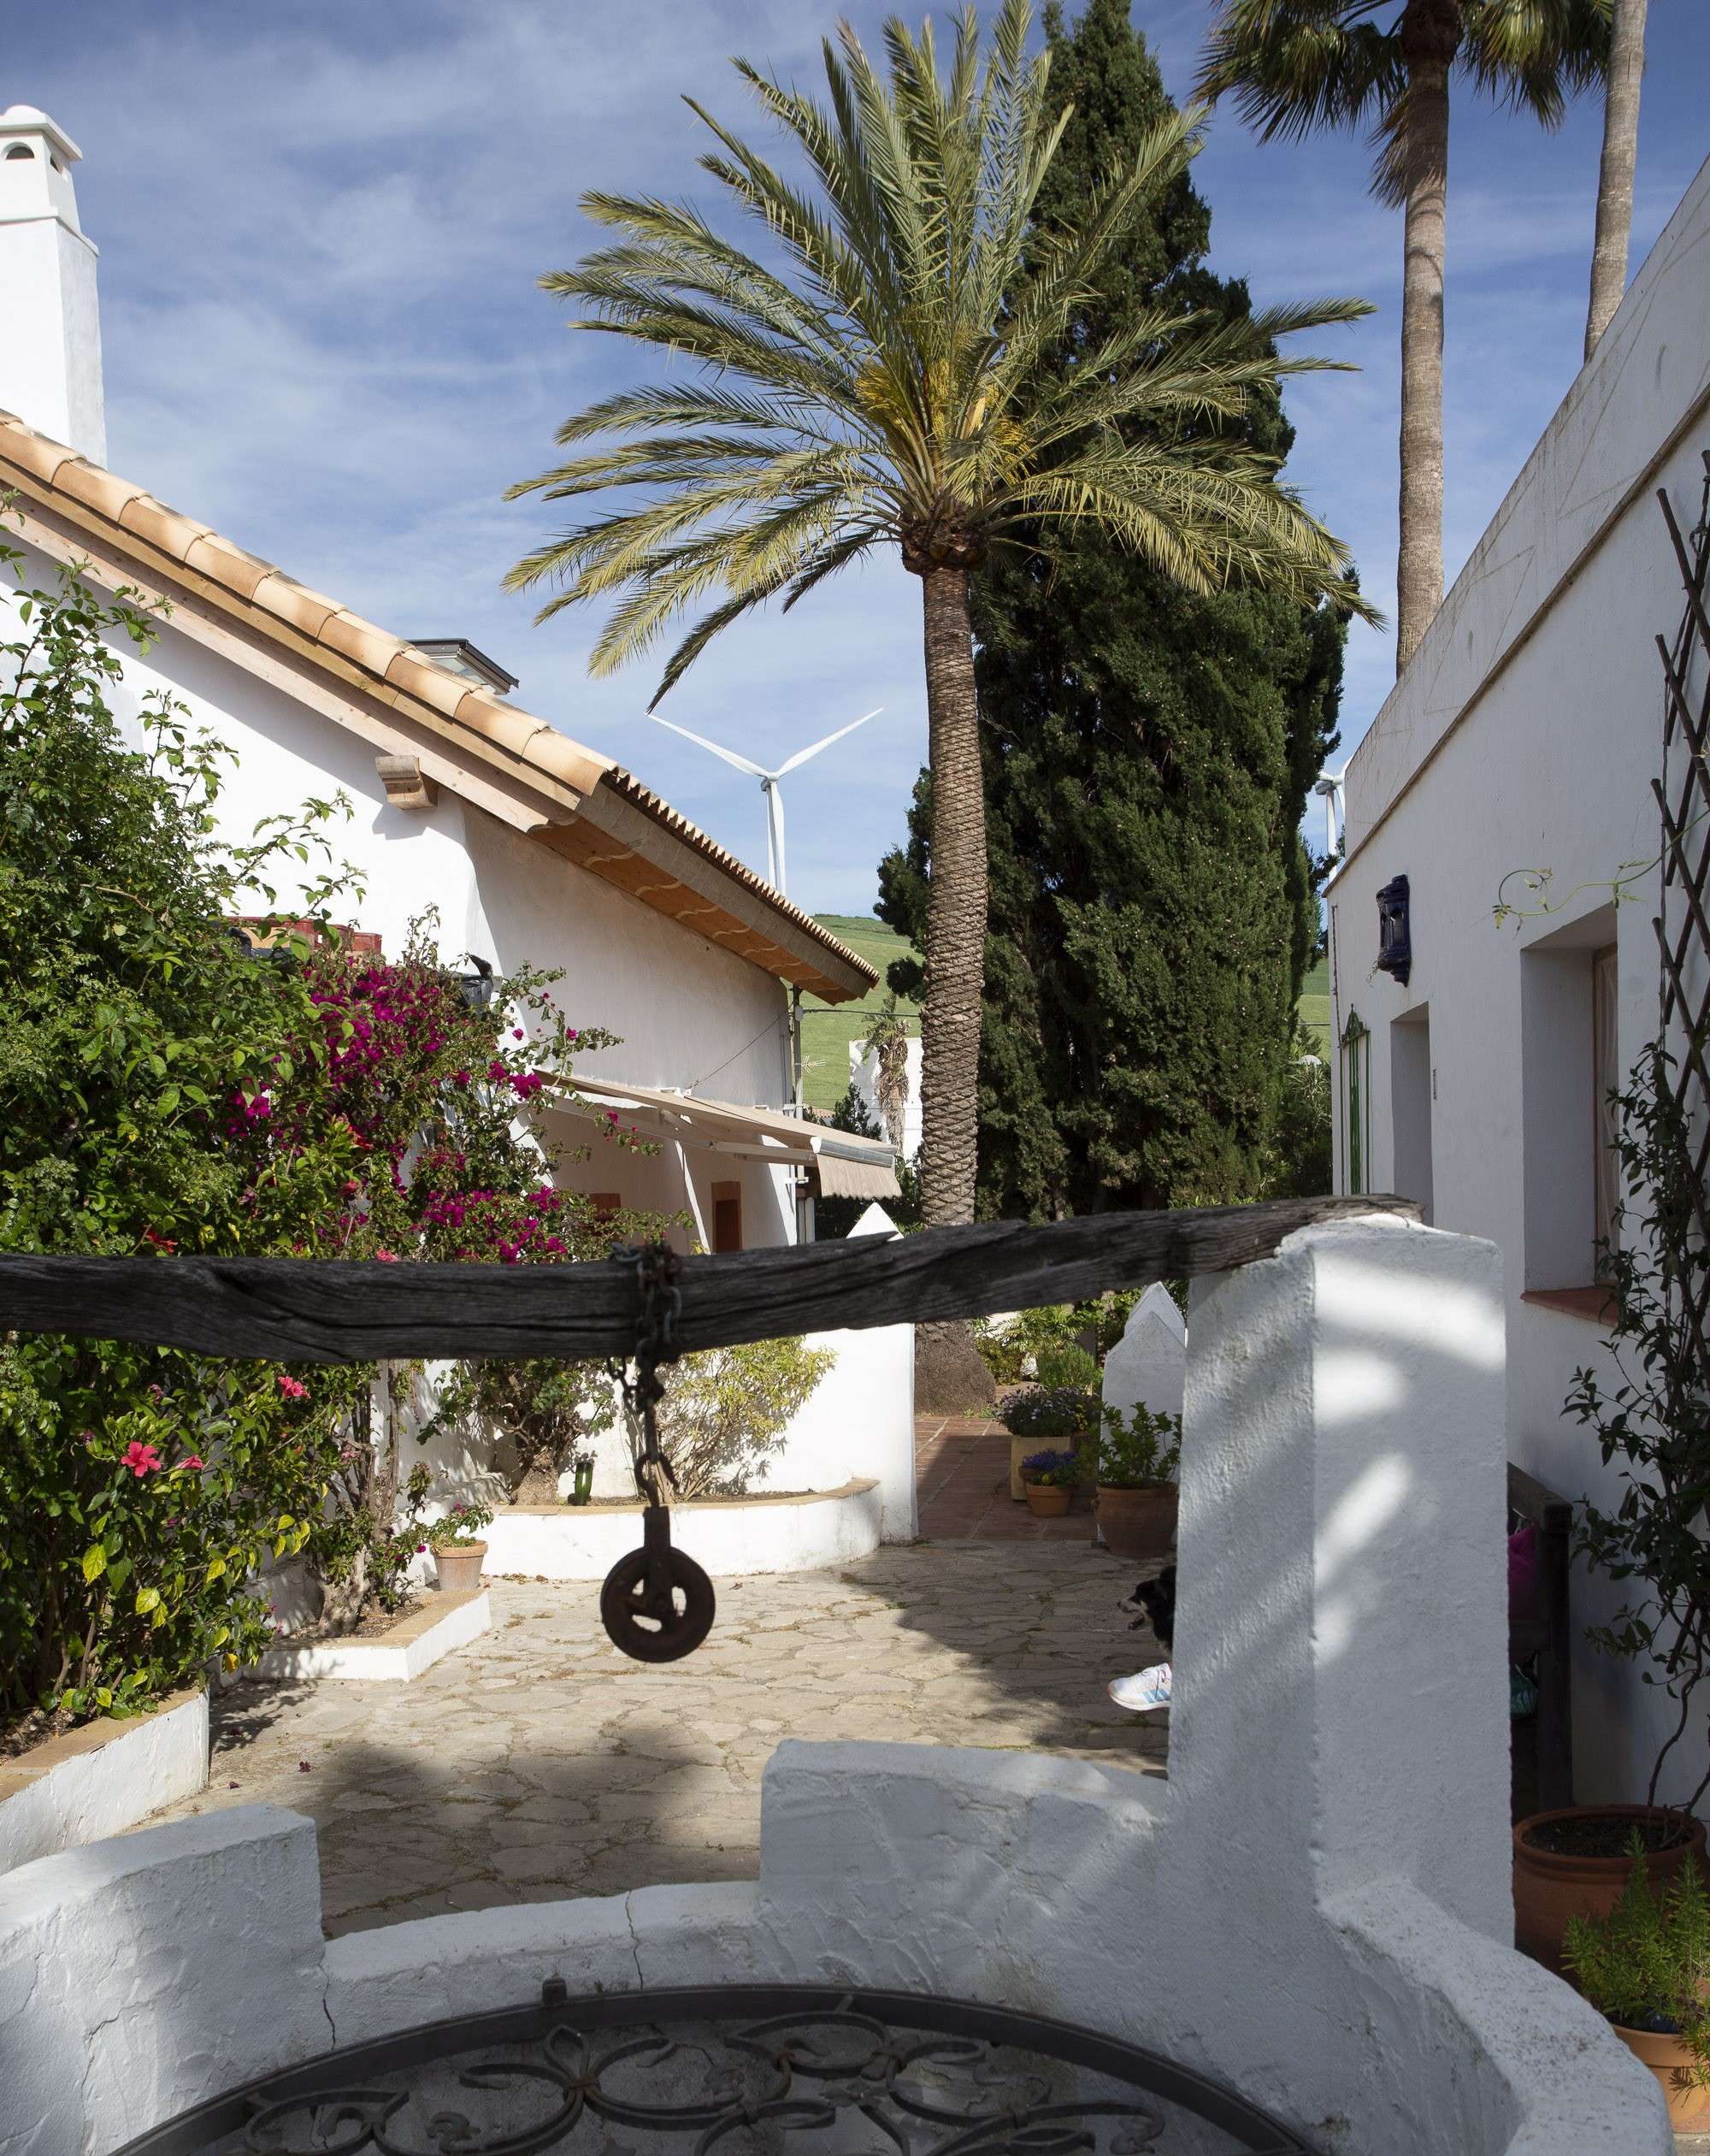 a well and 2 white houses, a terrace, flowers and palmtrees